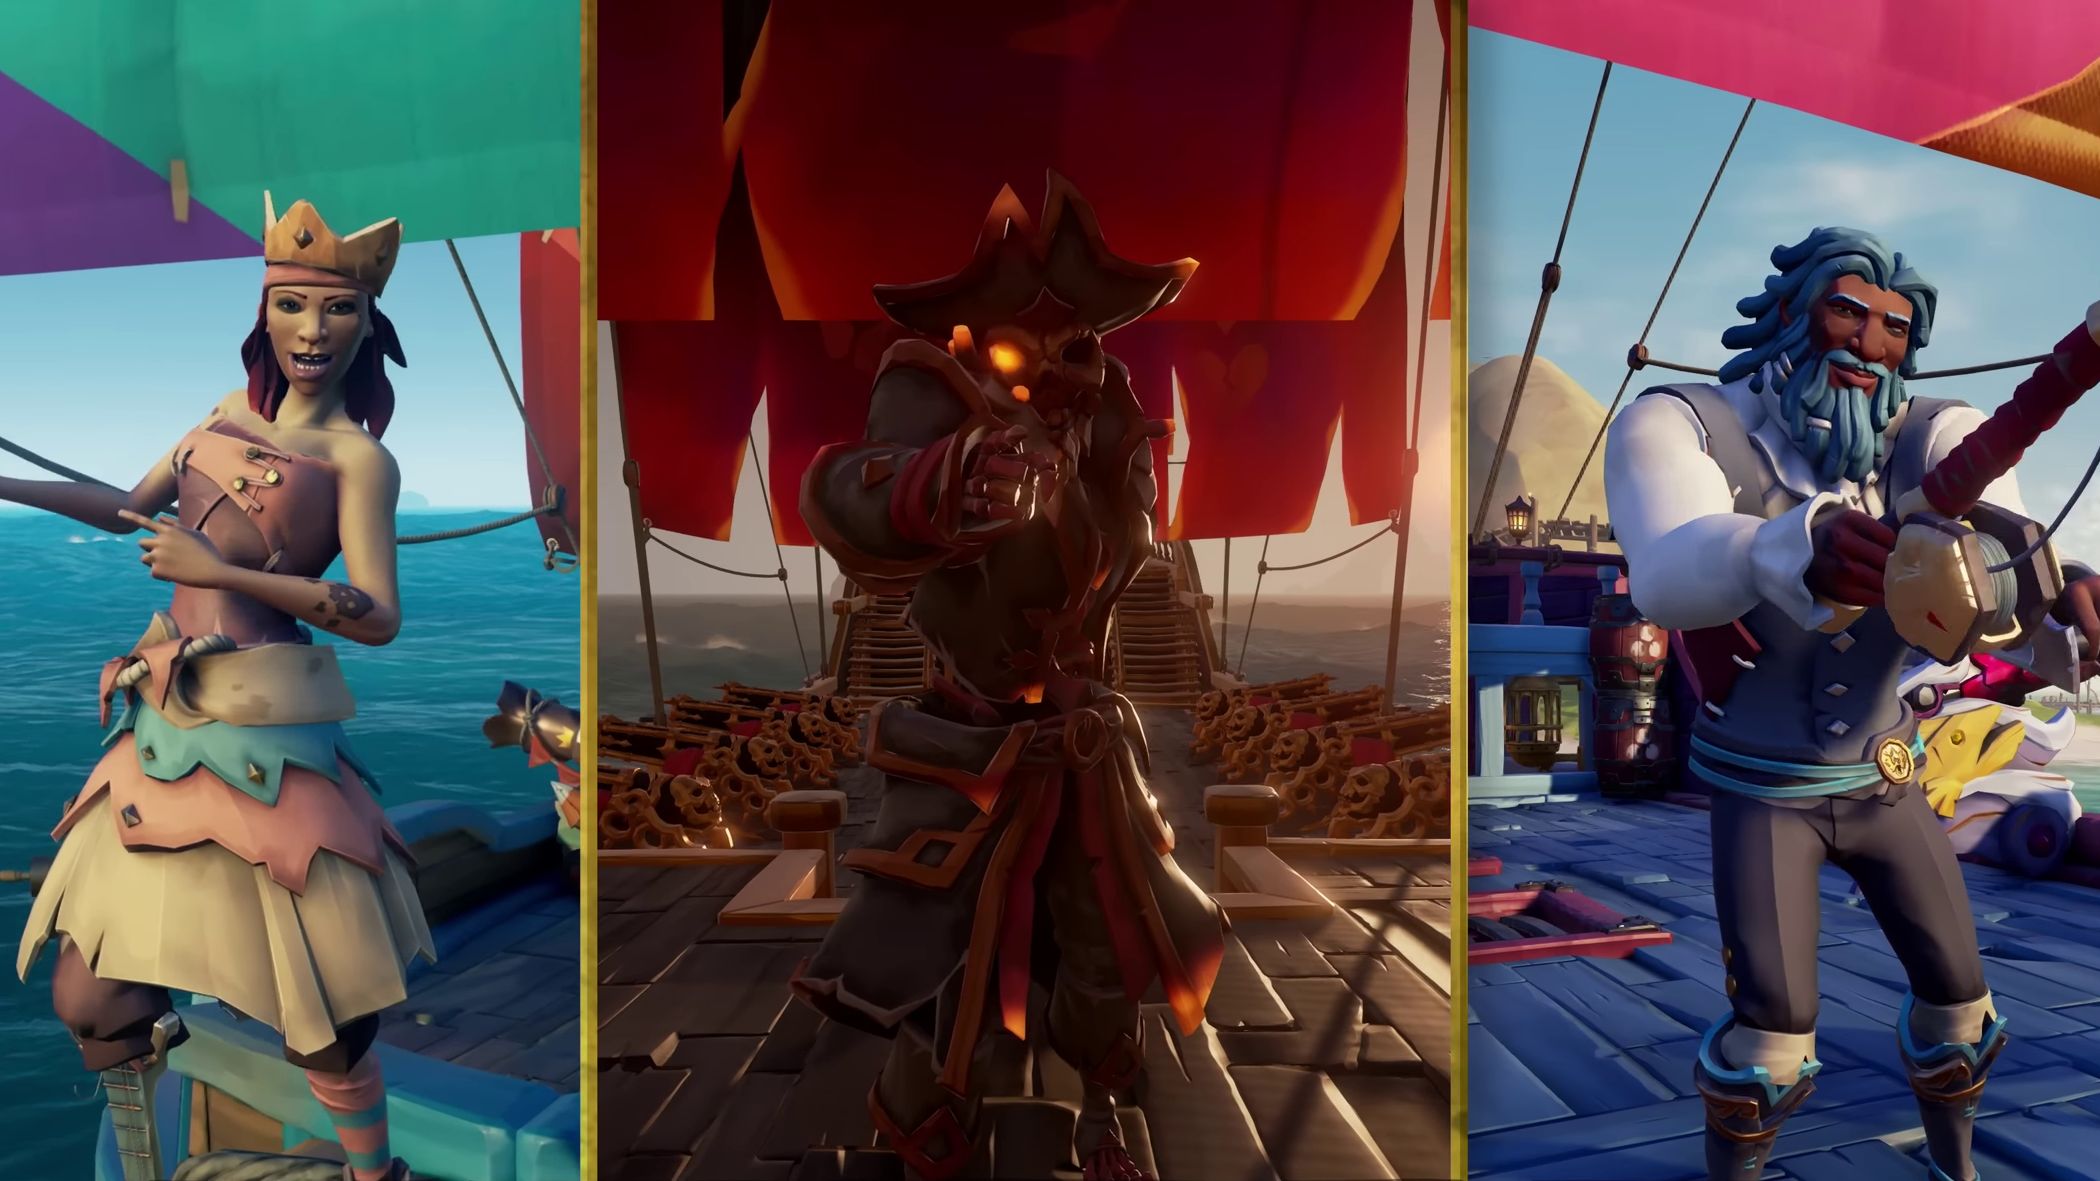 Three Captains in the Season Seven Sea Of Thieves update, each with different custom gear and ships